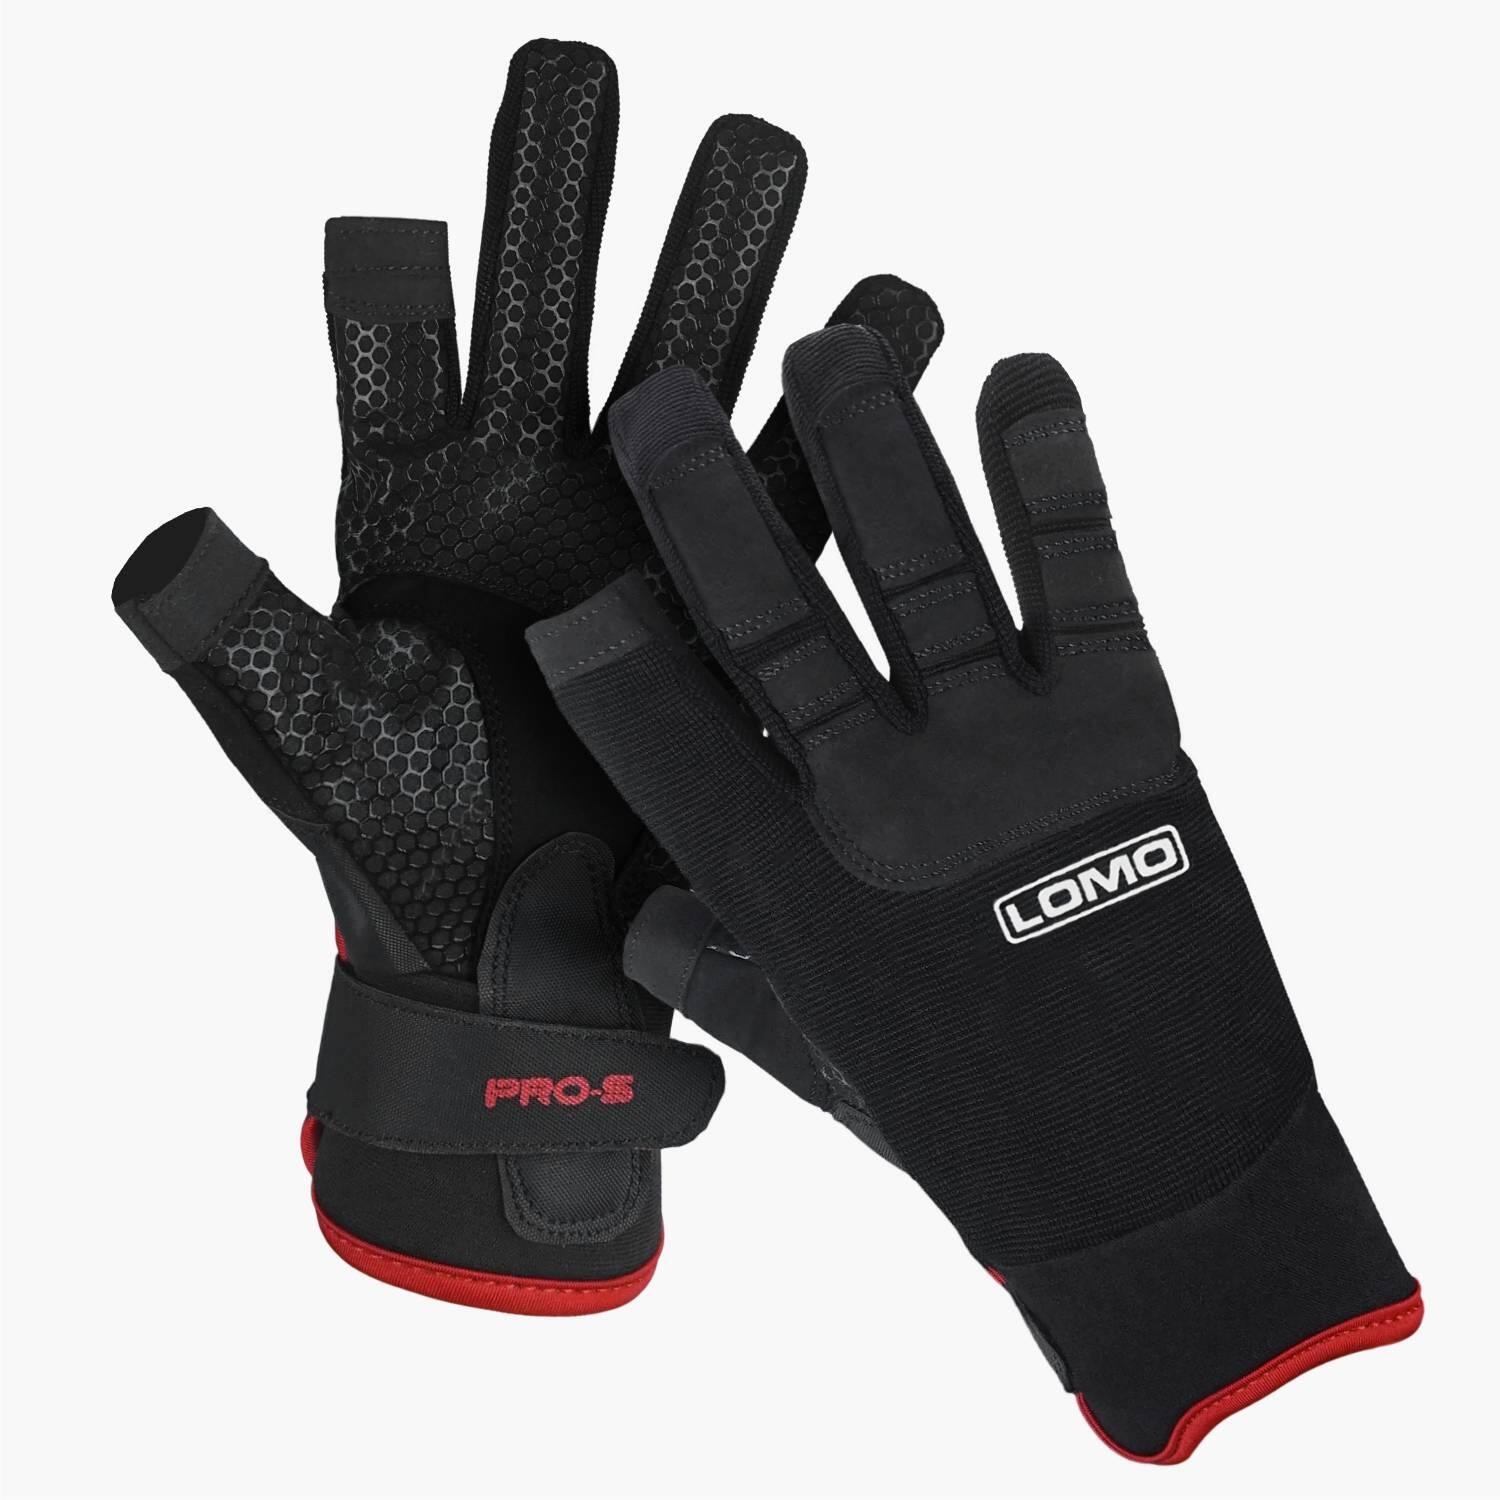 Sailing Pro-S Gloves - SIT (Short Index finger and Thumb) 4/7